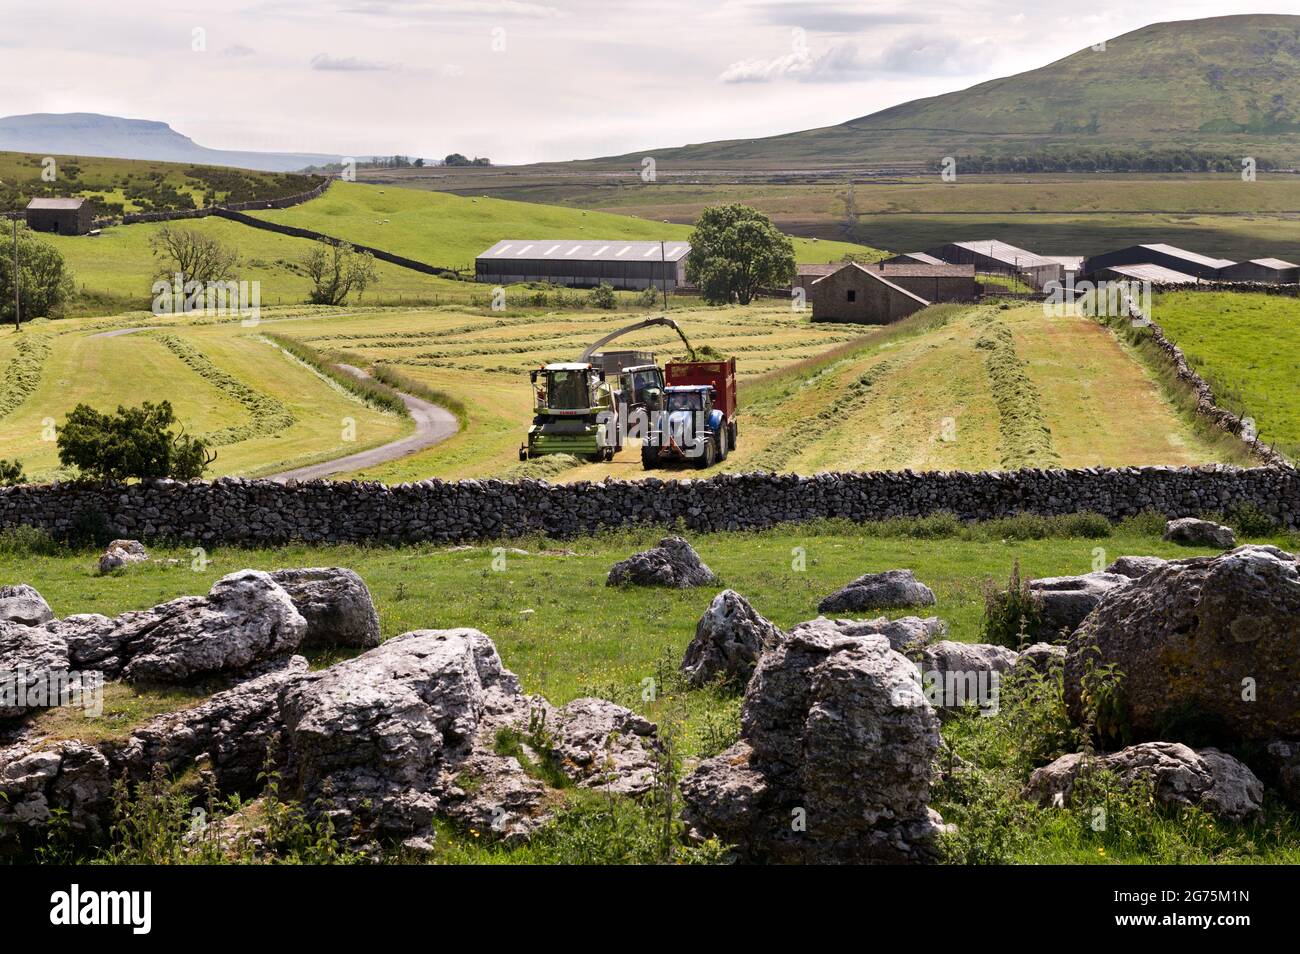 A forage harvester at work making silage for livestock feeding, Gunnerfleet, Ribblehead, Yorkshire Dales National Park Stock Photo